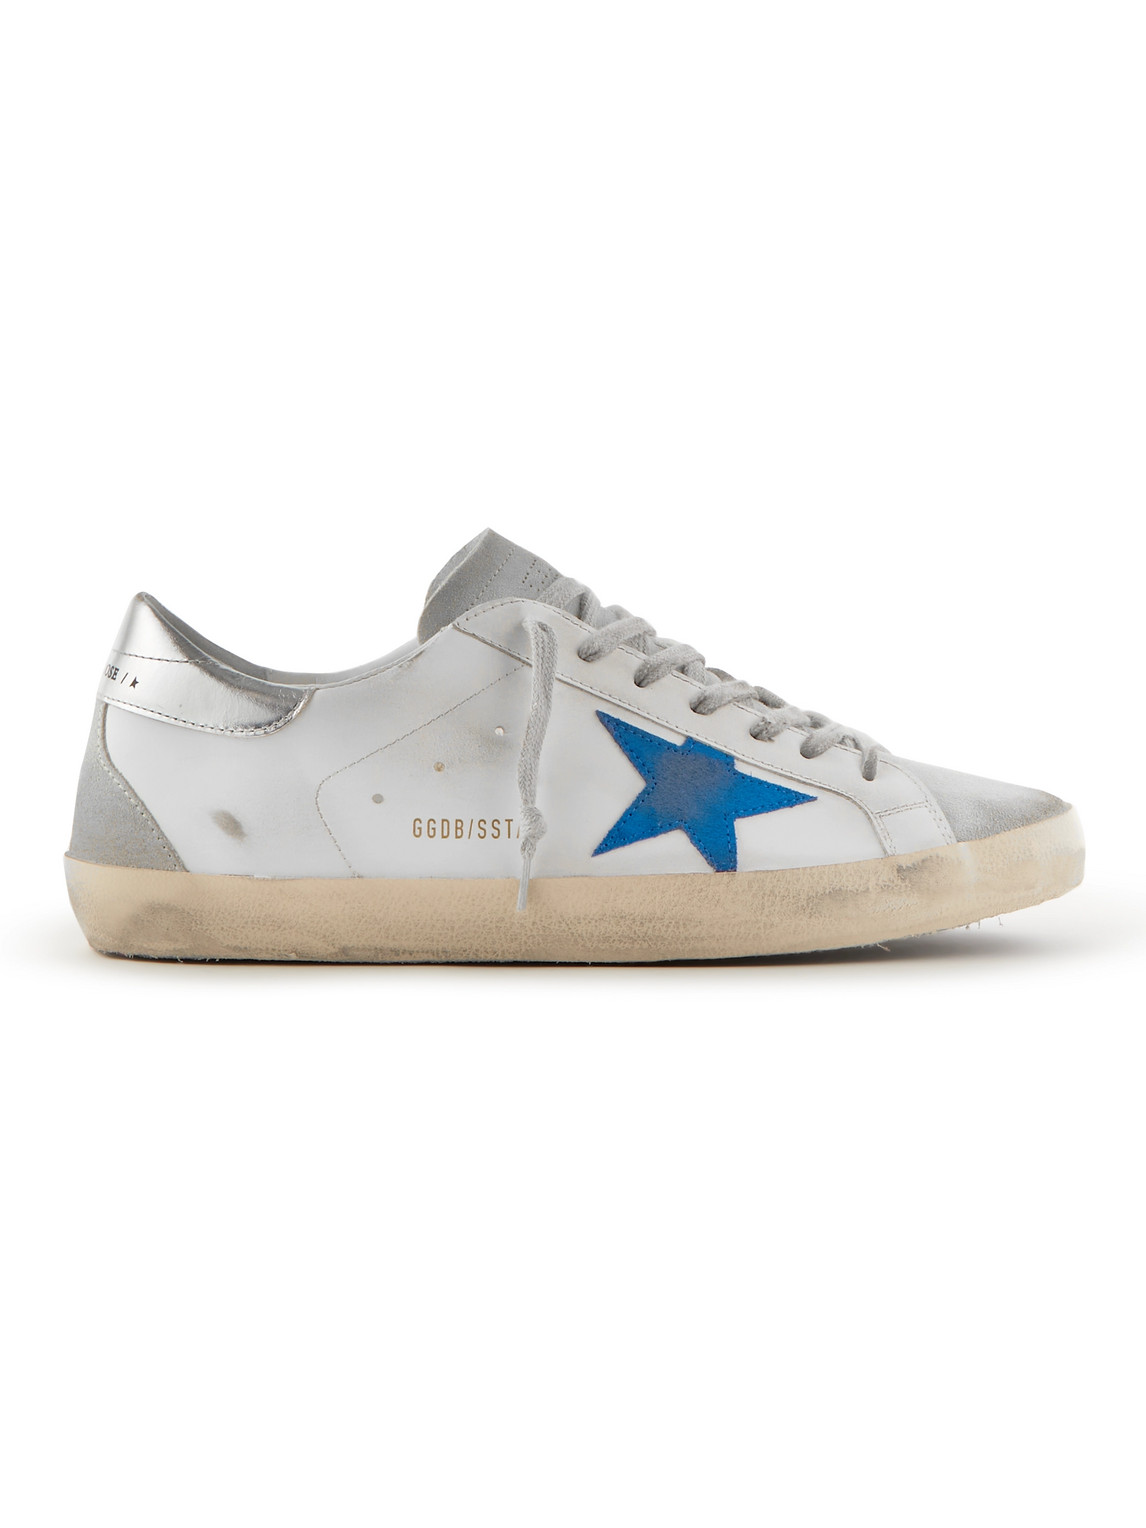 Superstar Distressed Leather and Suede Sneakers